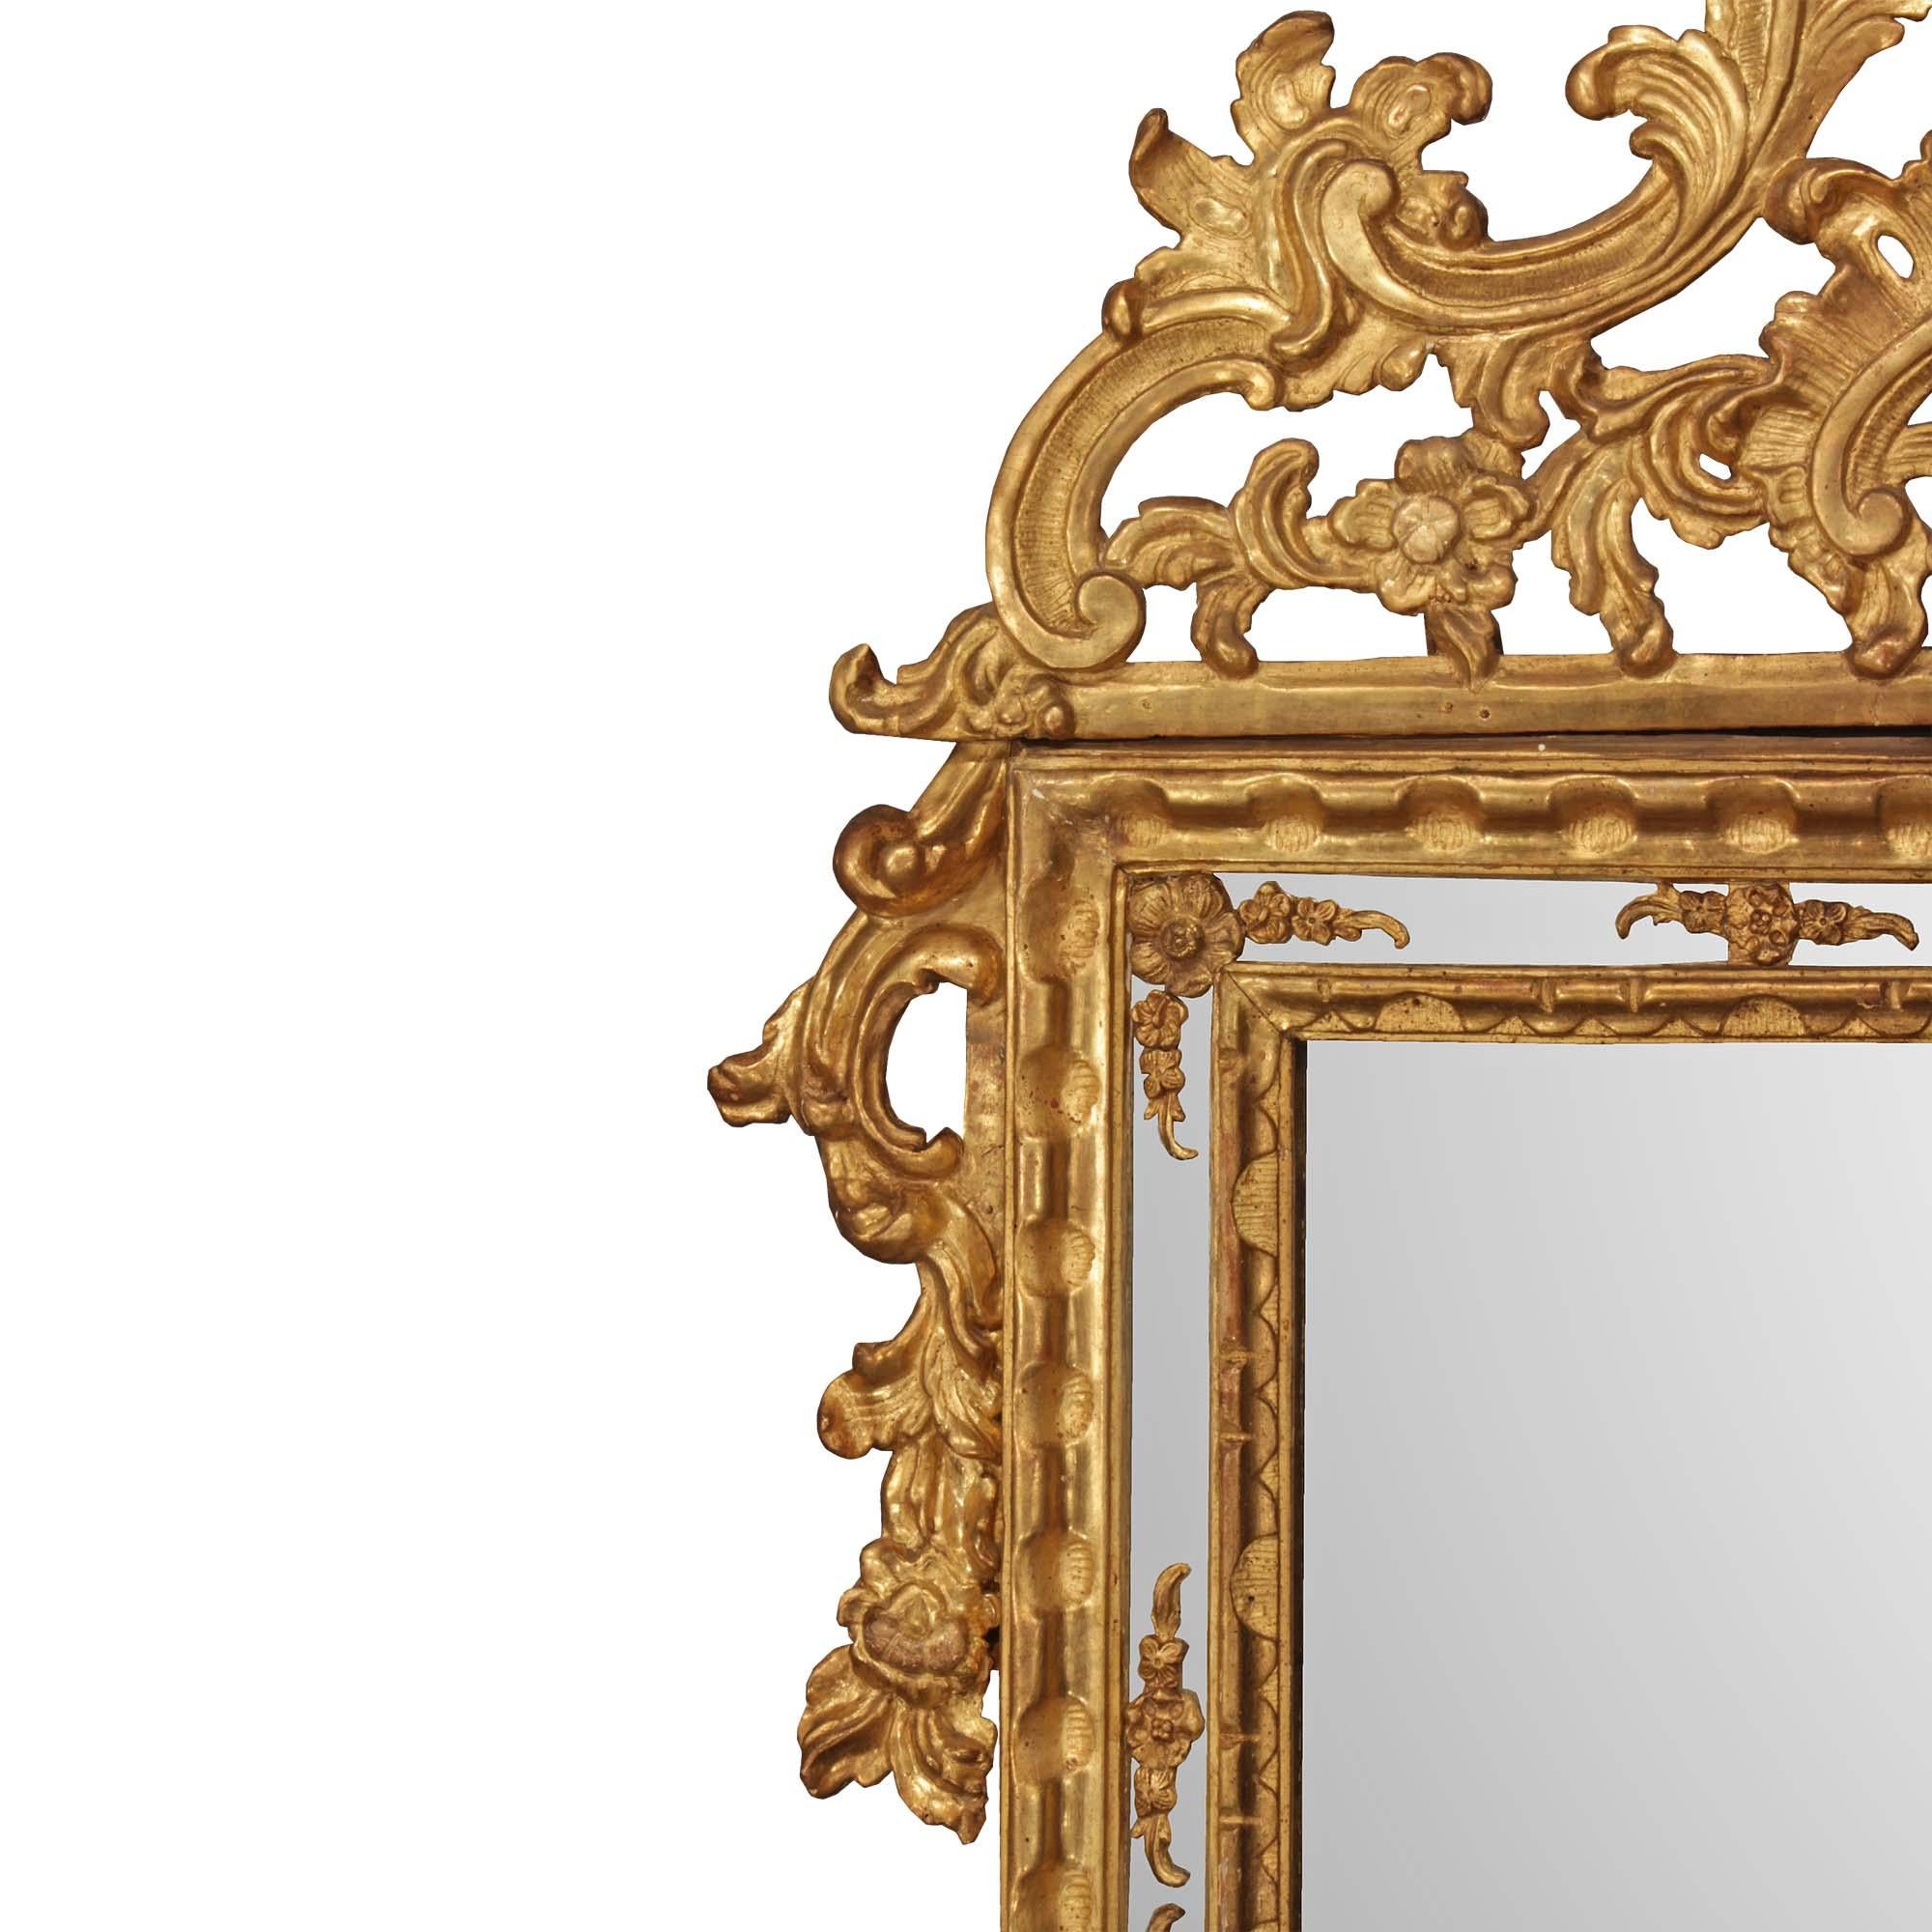 A stunning Italian 18th century Louis XIV period double framed giltwood mirror. The original mirror plate is framed within a carved band in a satin and burnished finish and an elegant mirror plate border with exquisite giltwood floral carvings and